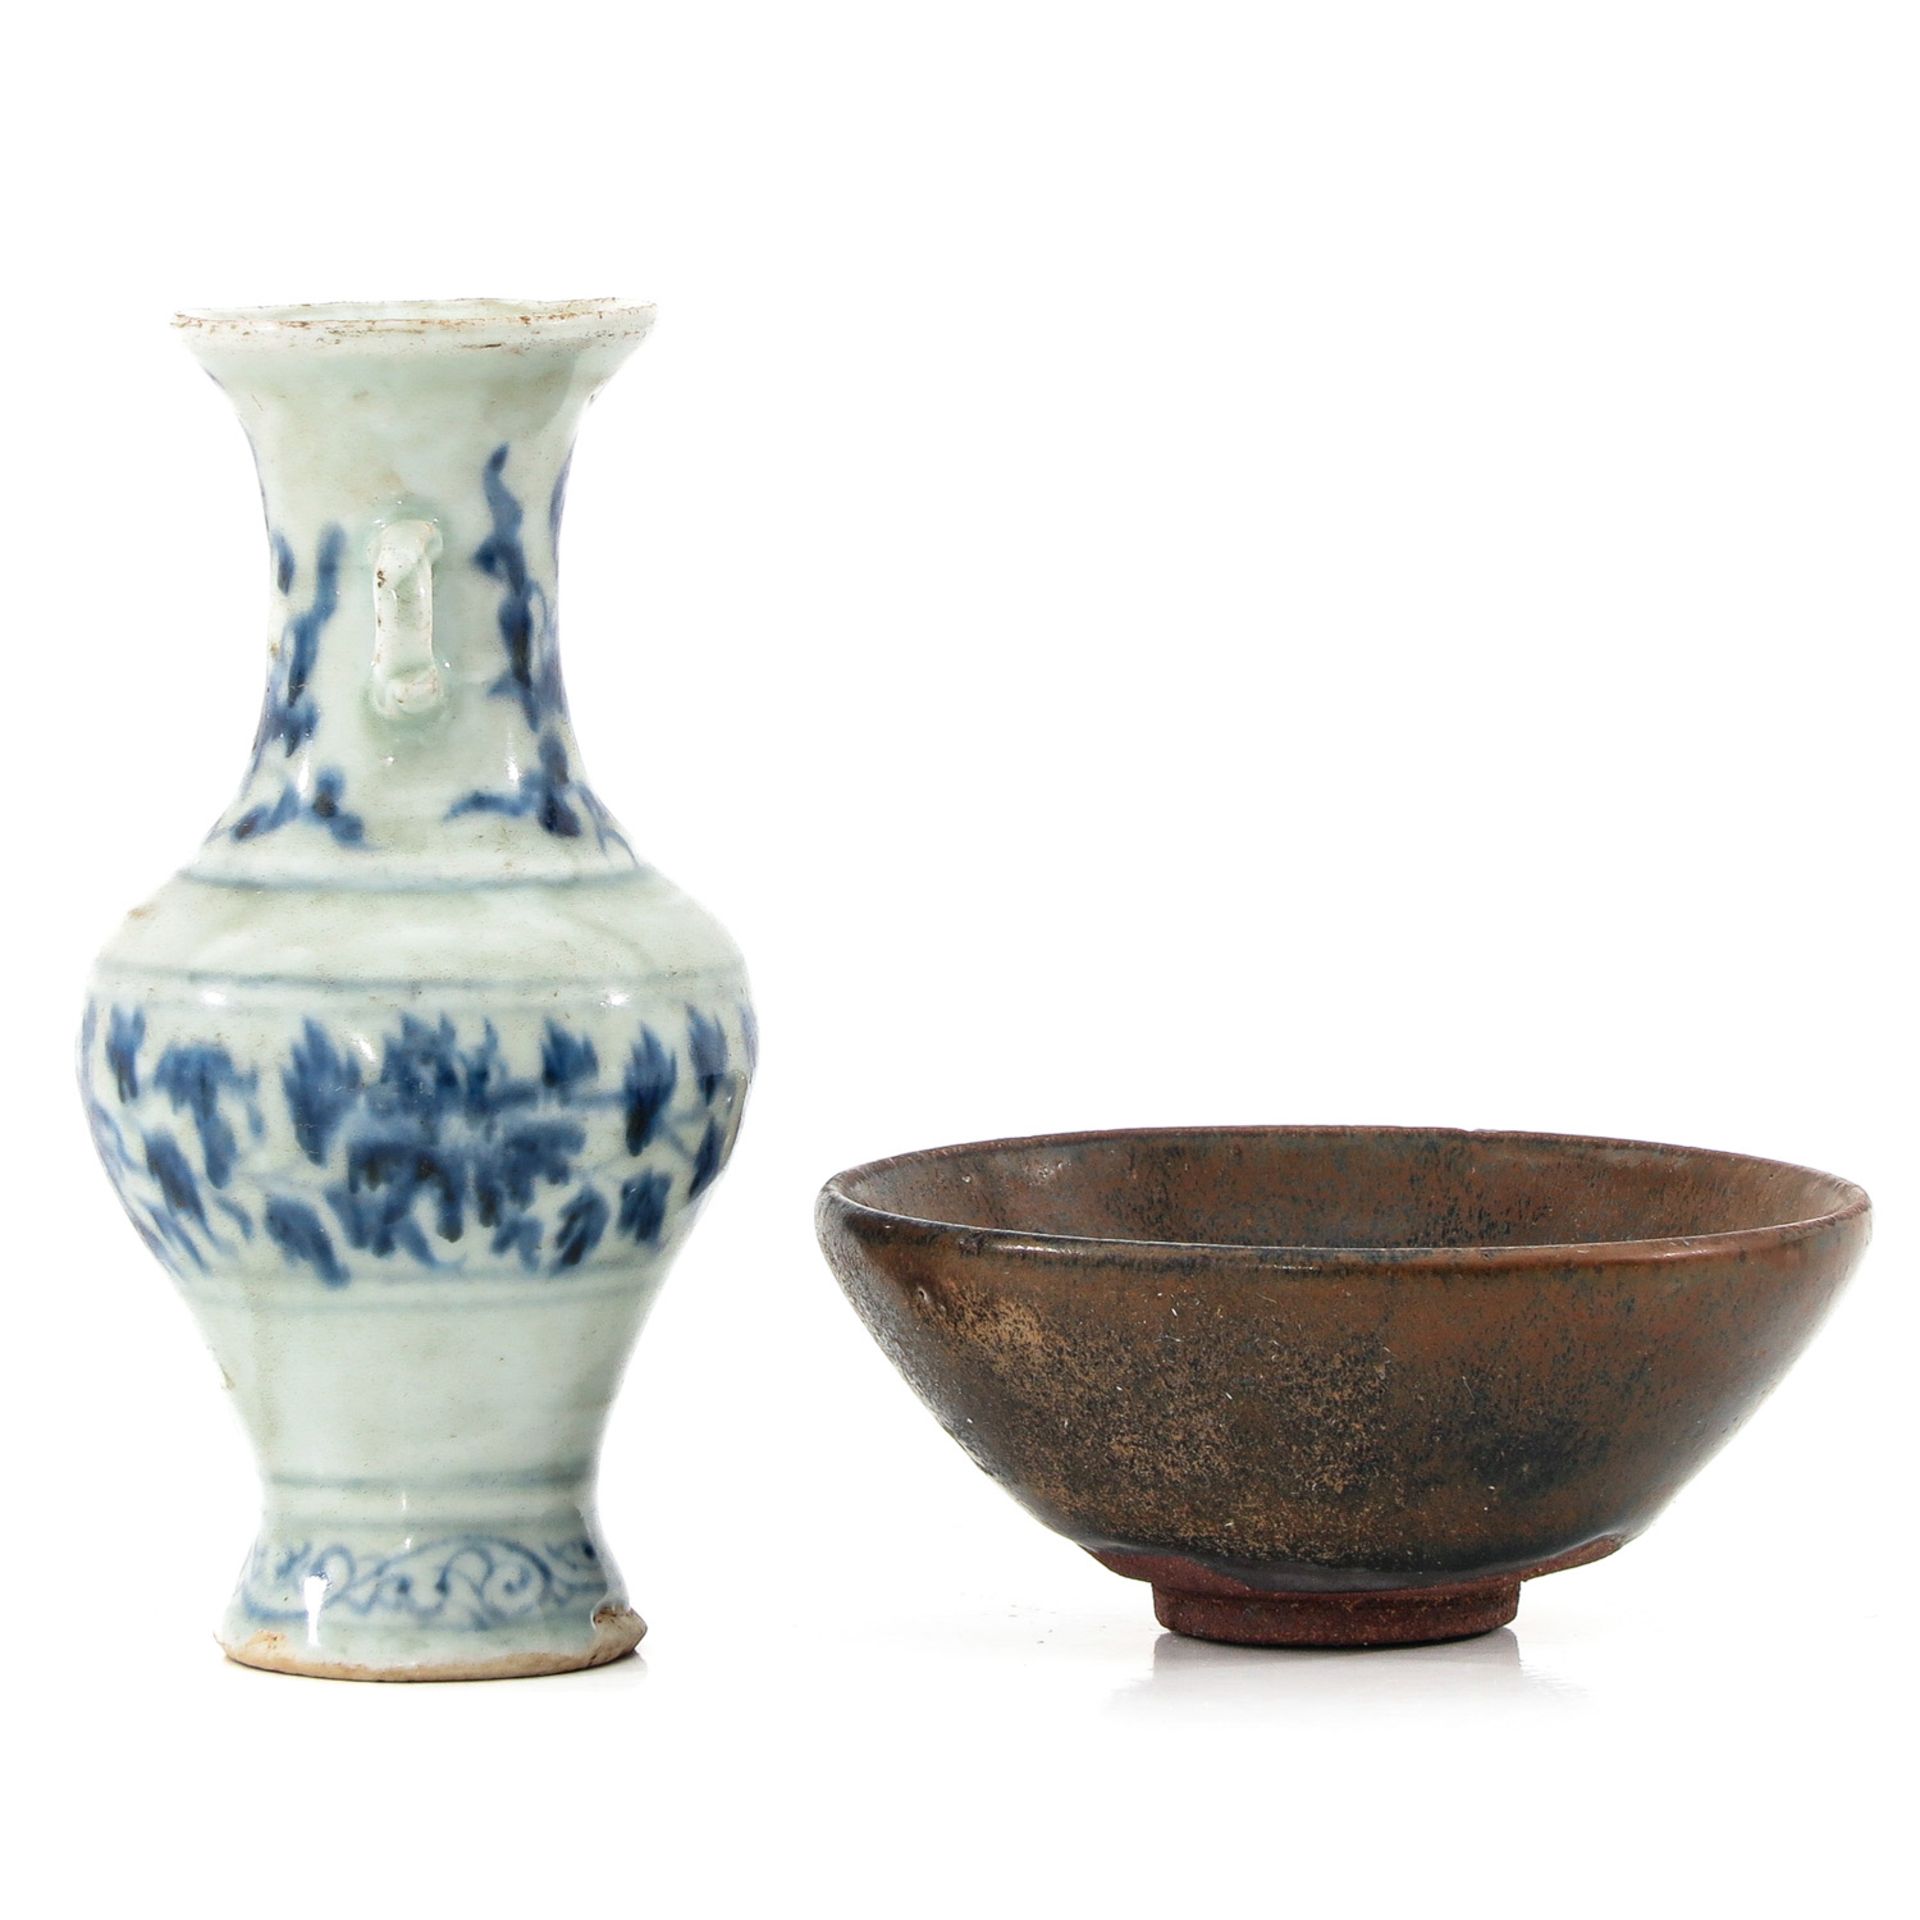 A Small Vase and Tea Bowl - Image 4 of 10